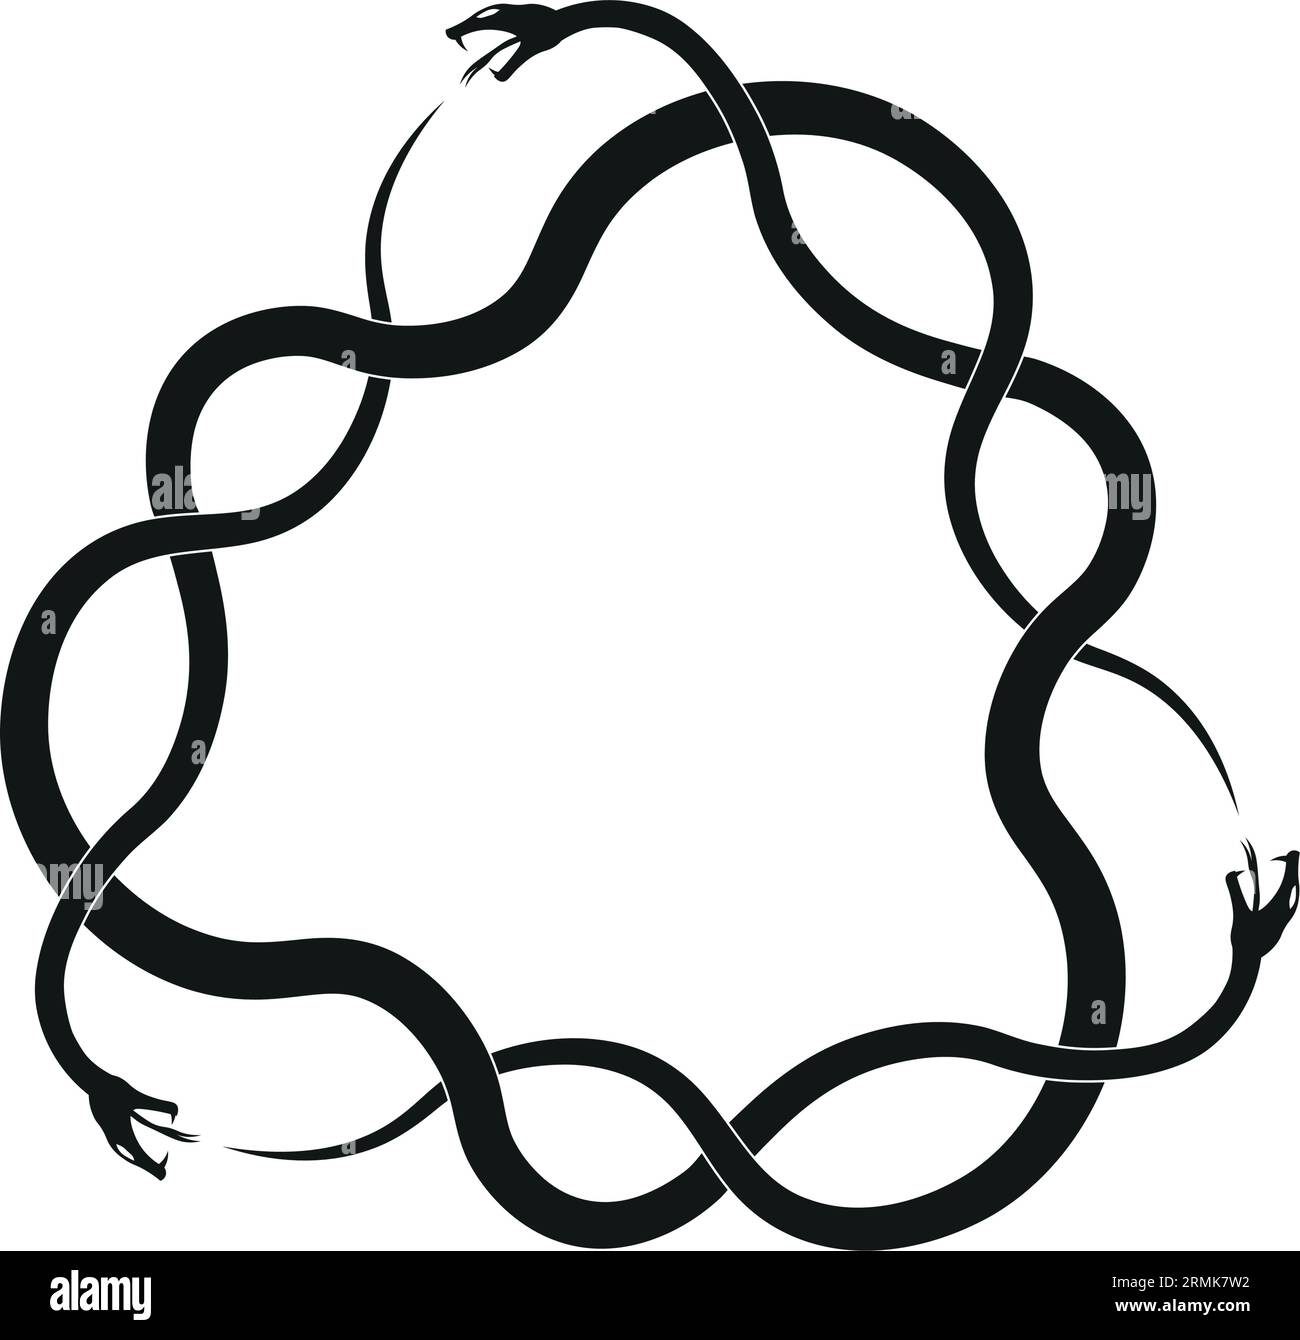 Three serpents intertwine in an Ouroboros, symbolizing eternal balance and wisdom. Stock Vector